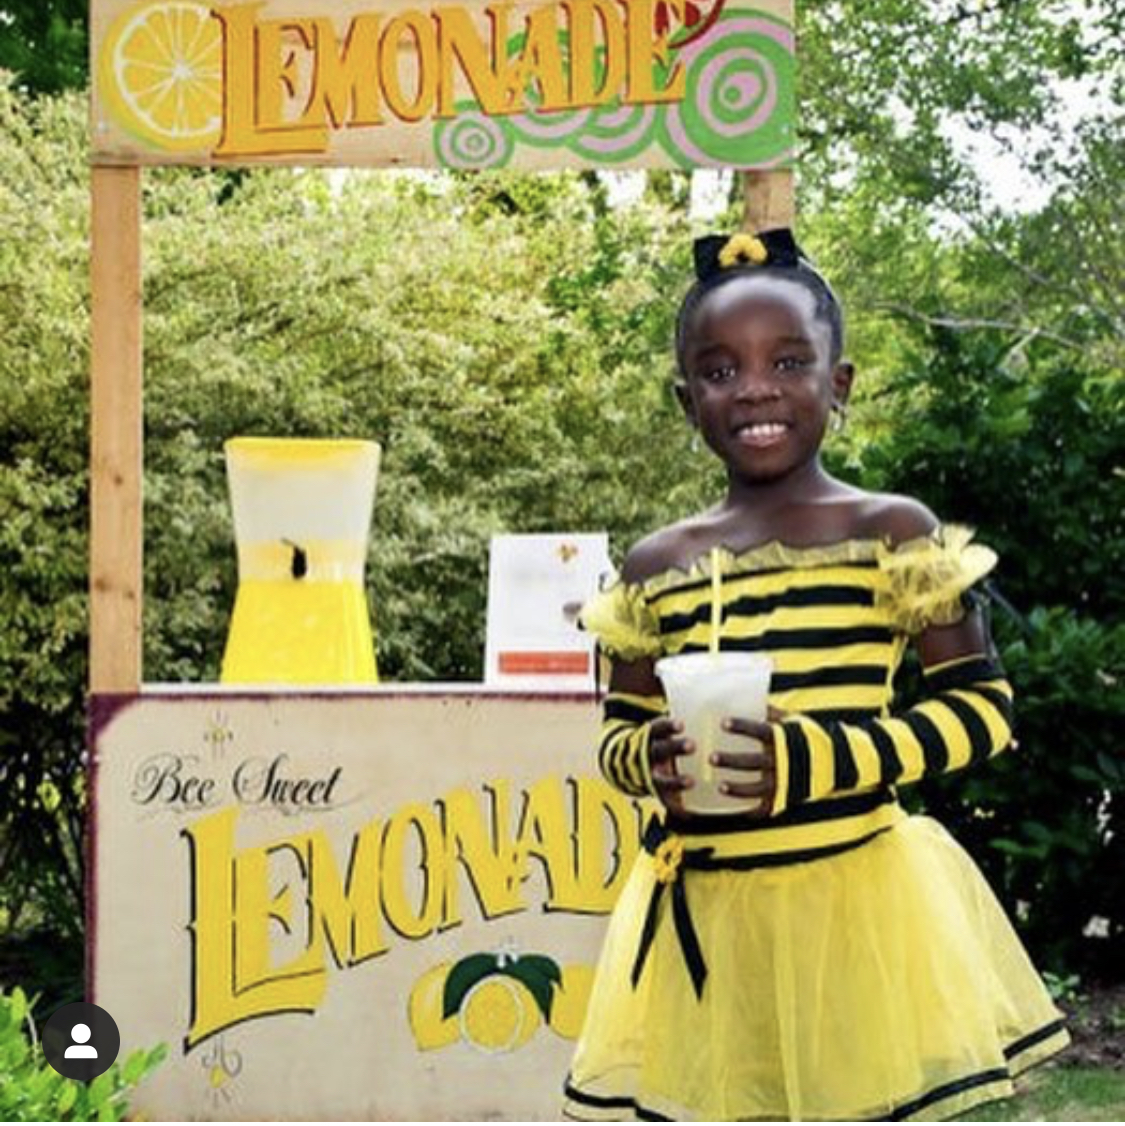 here we see the founder of Me & the Bees Lemonade when she was a little older